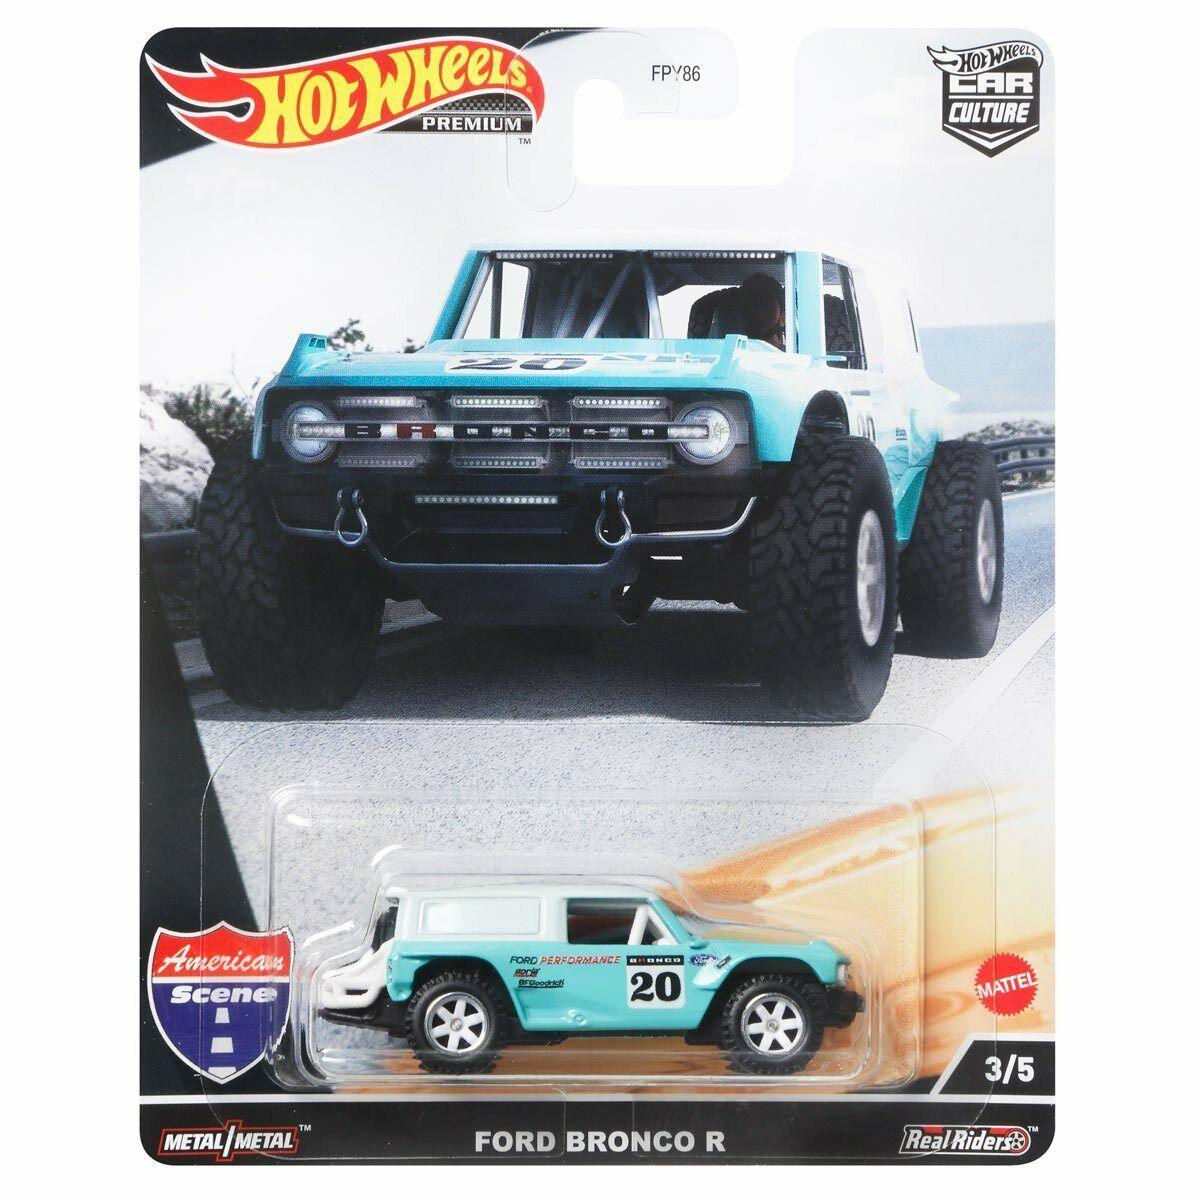 Hot Wheels premium 2023 Car Ford Bronco R #20 Turquoise with White Top 